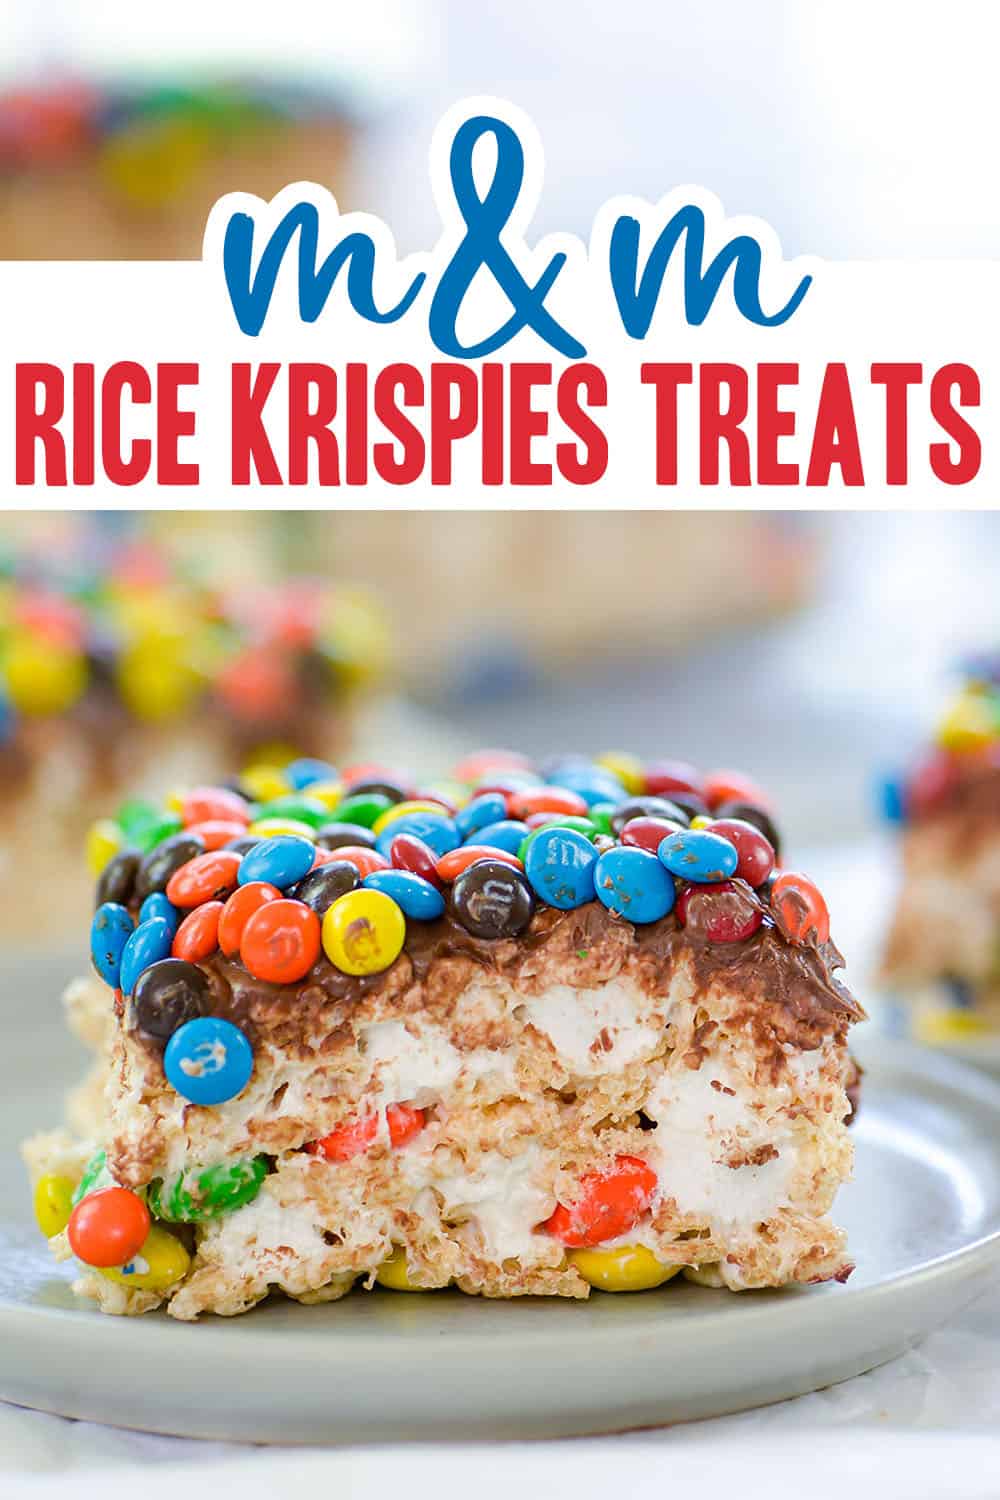 thick rice krispies treat topped with chocolate and m&m's on white plate.